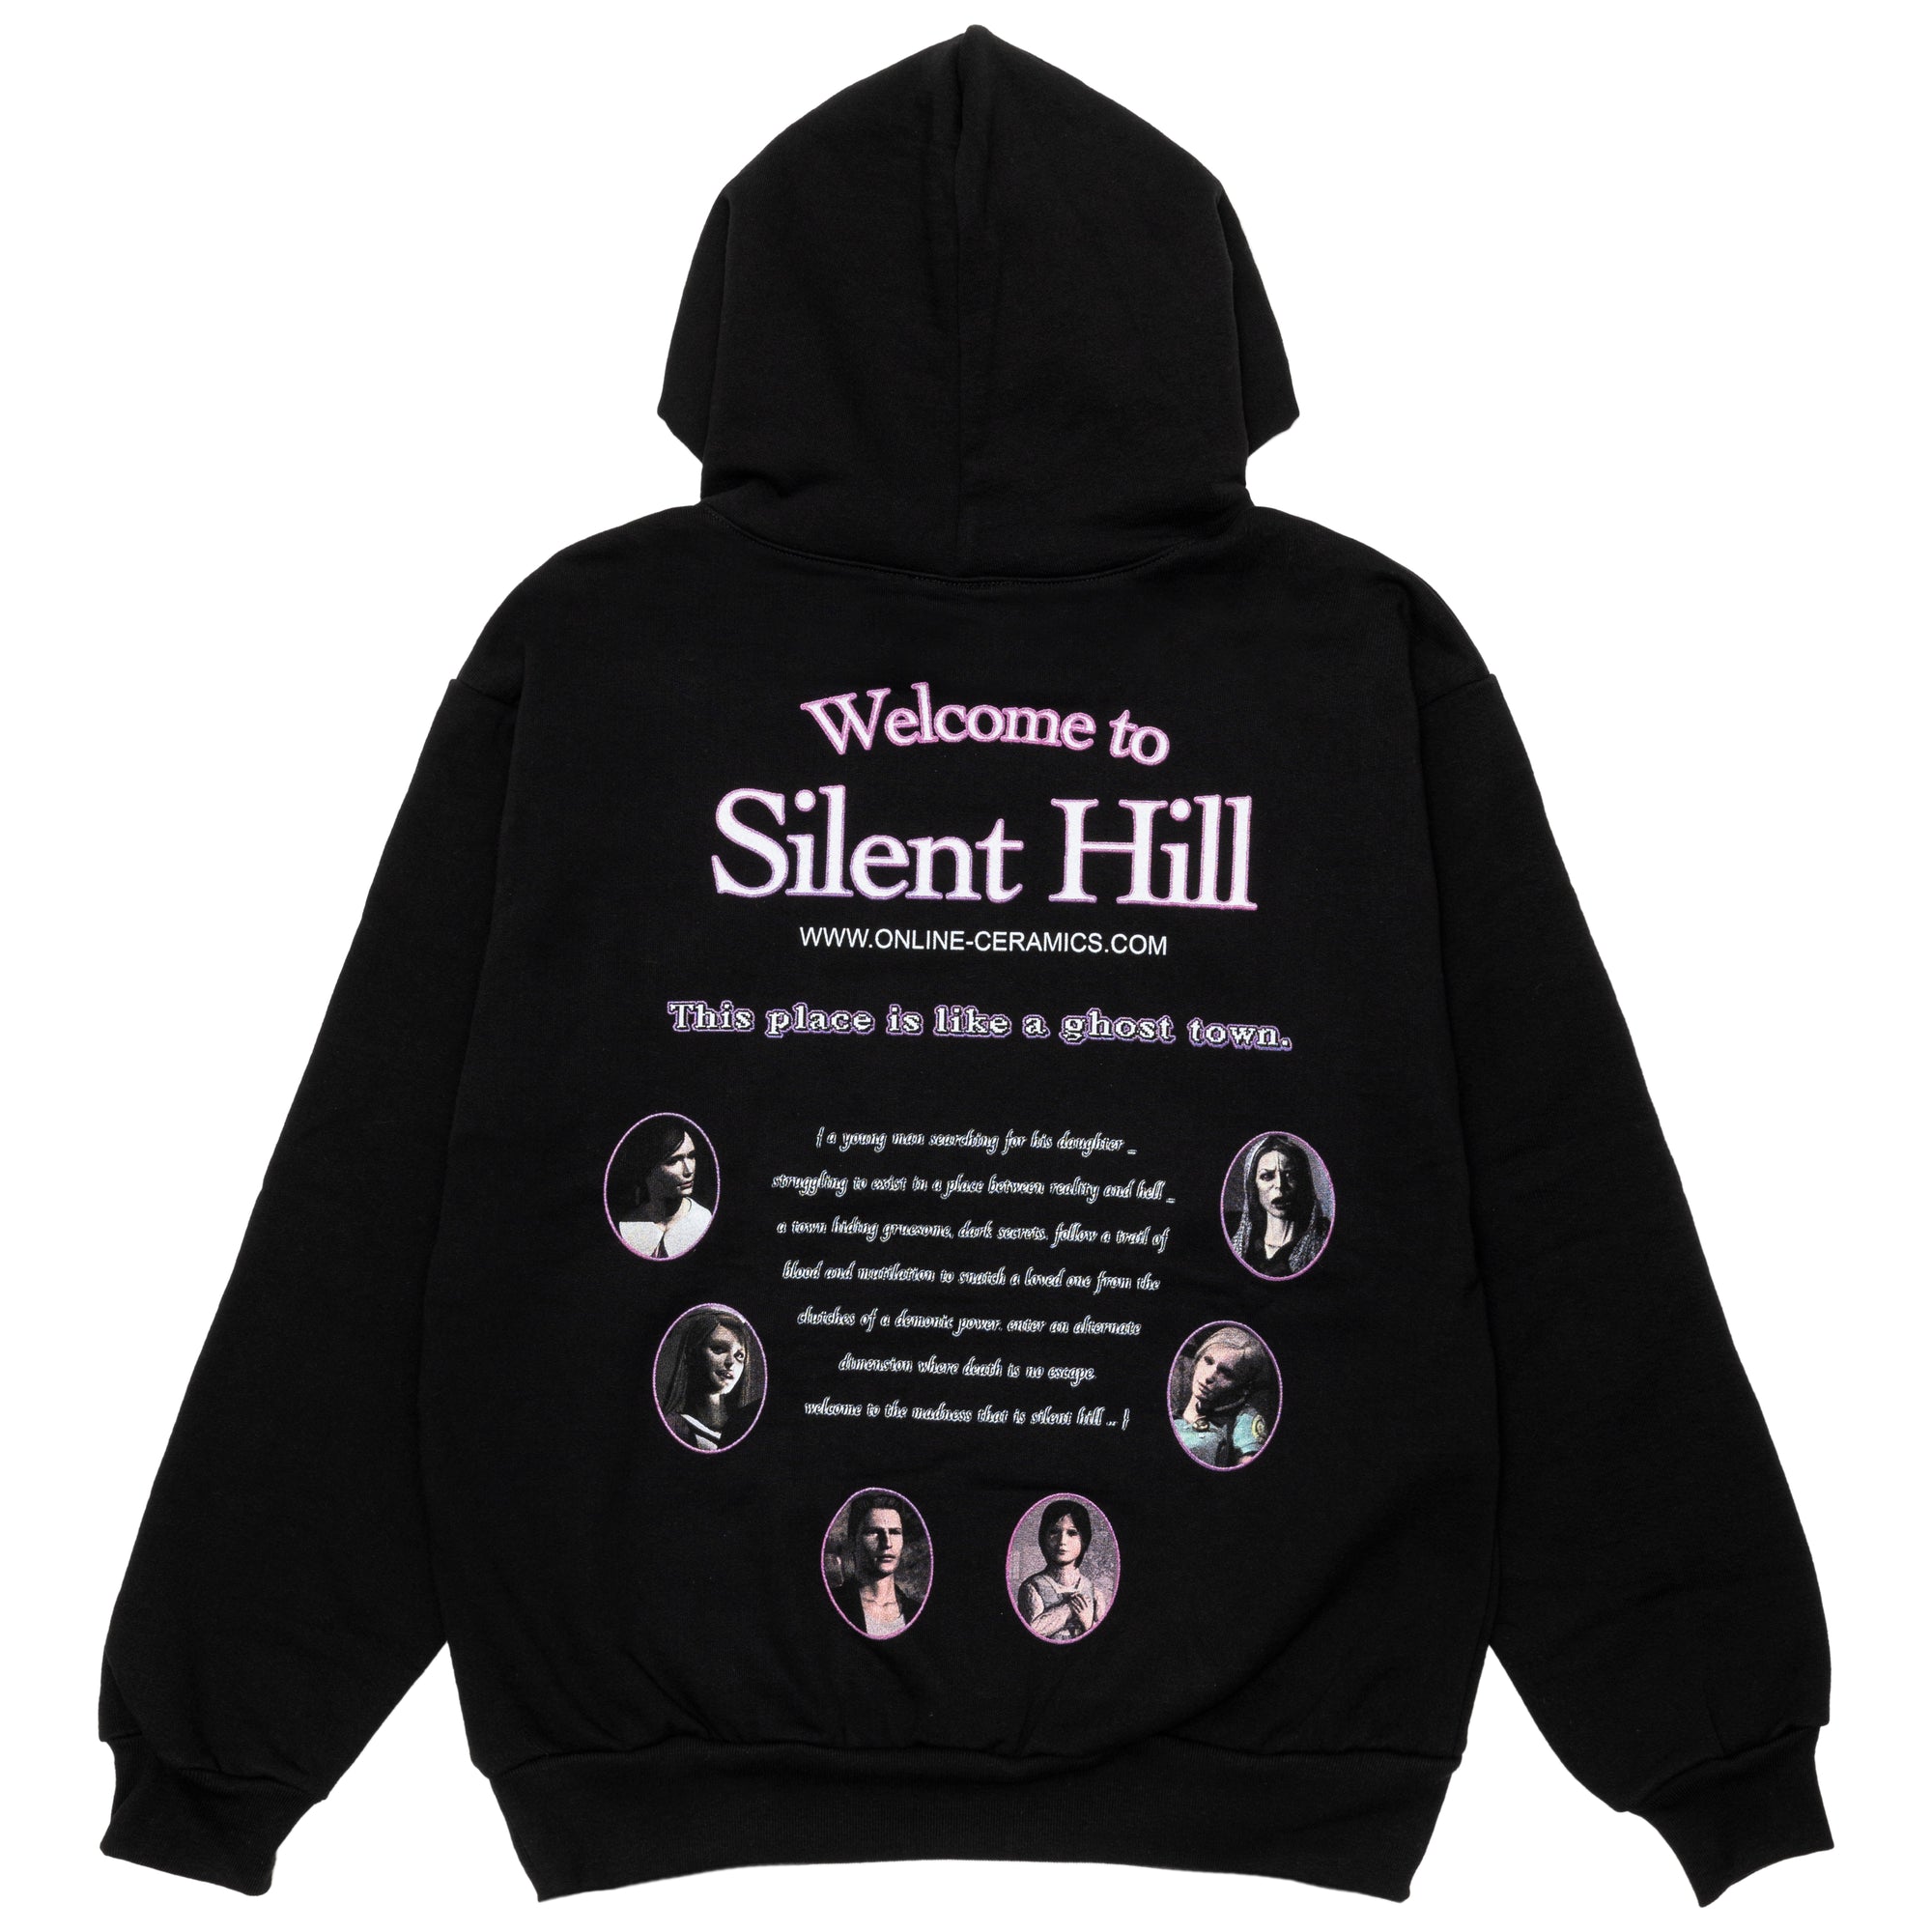 ONLINE CERAMICS - Welcome To Silent Hill Hoodie - (Black) view 2